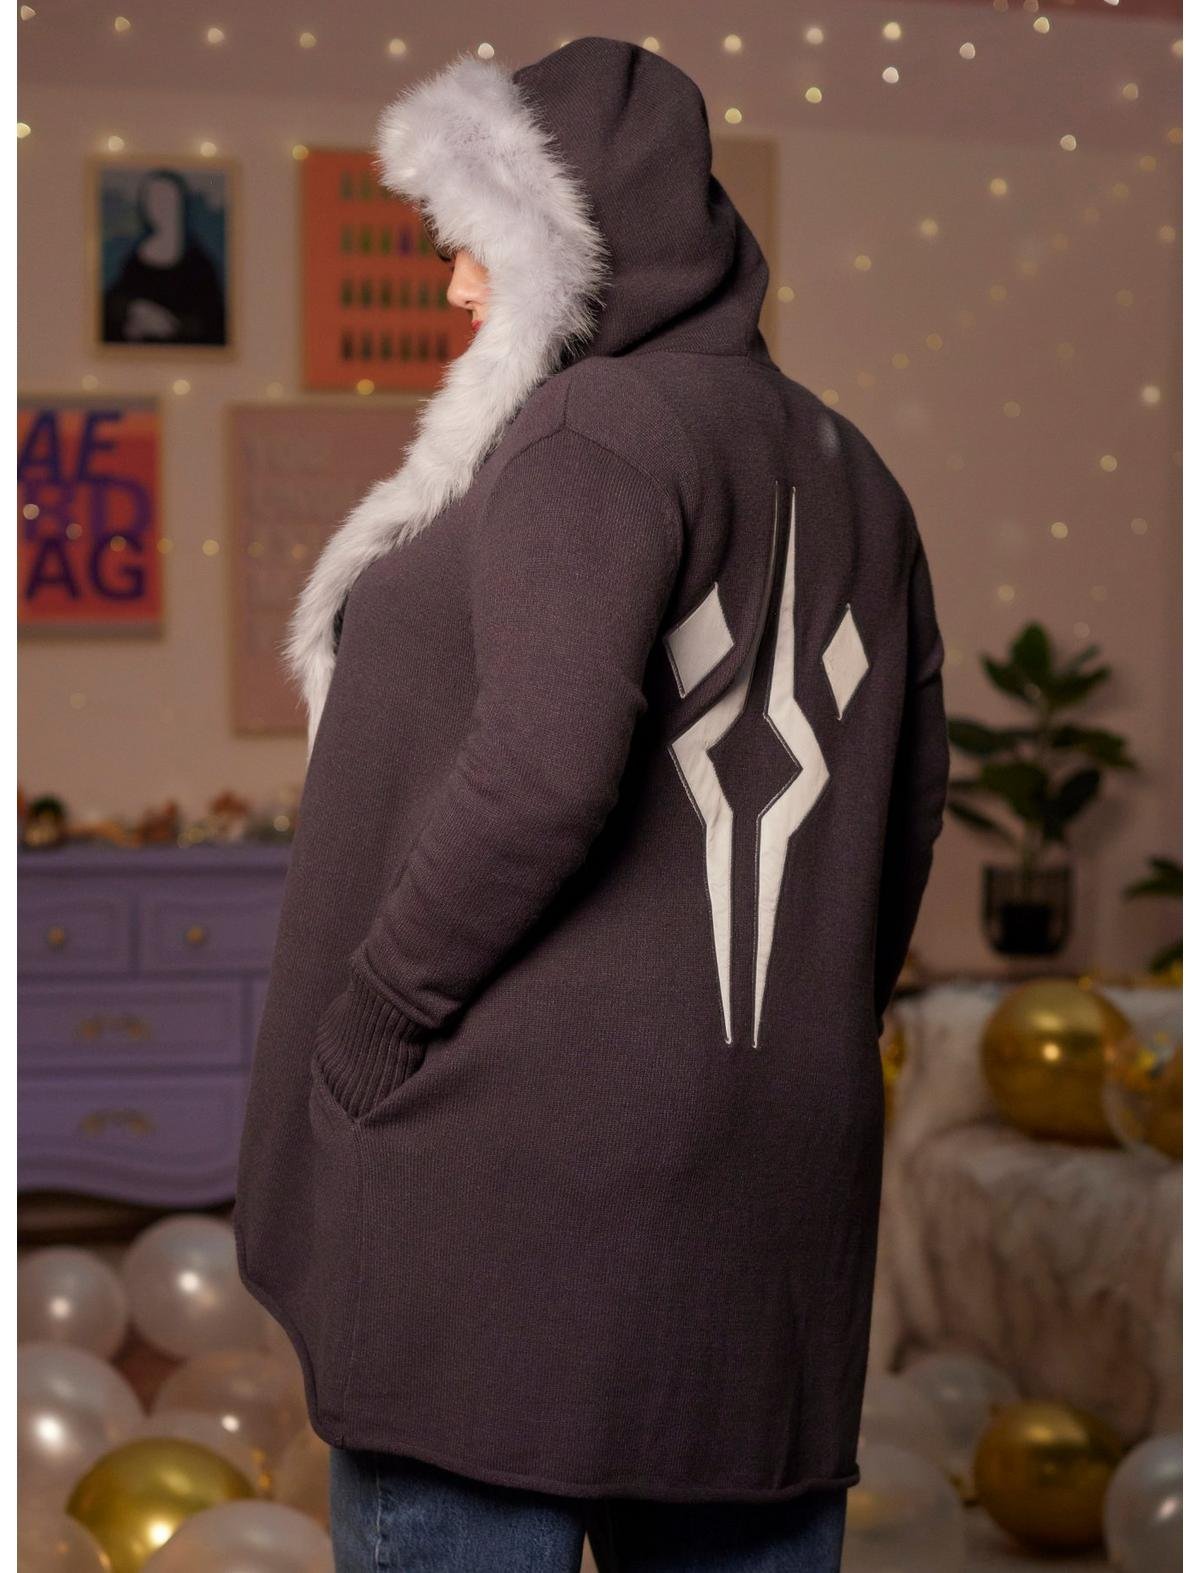 Her Universe Star Wars Ahsoka Tano Faux Fur Hooded Cardigan Plus Size Her Universe Exclusive